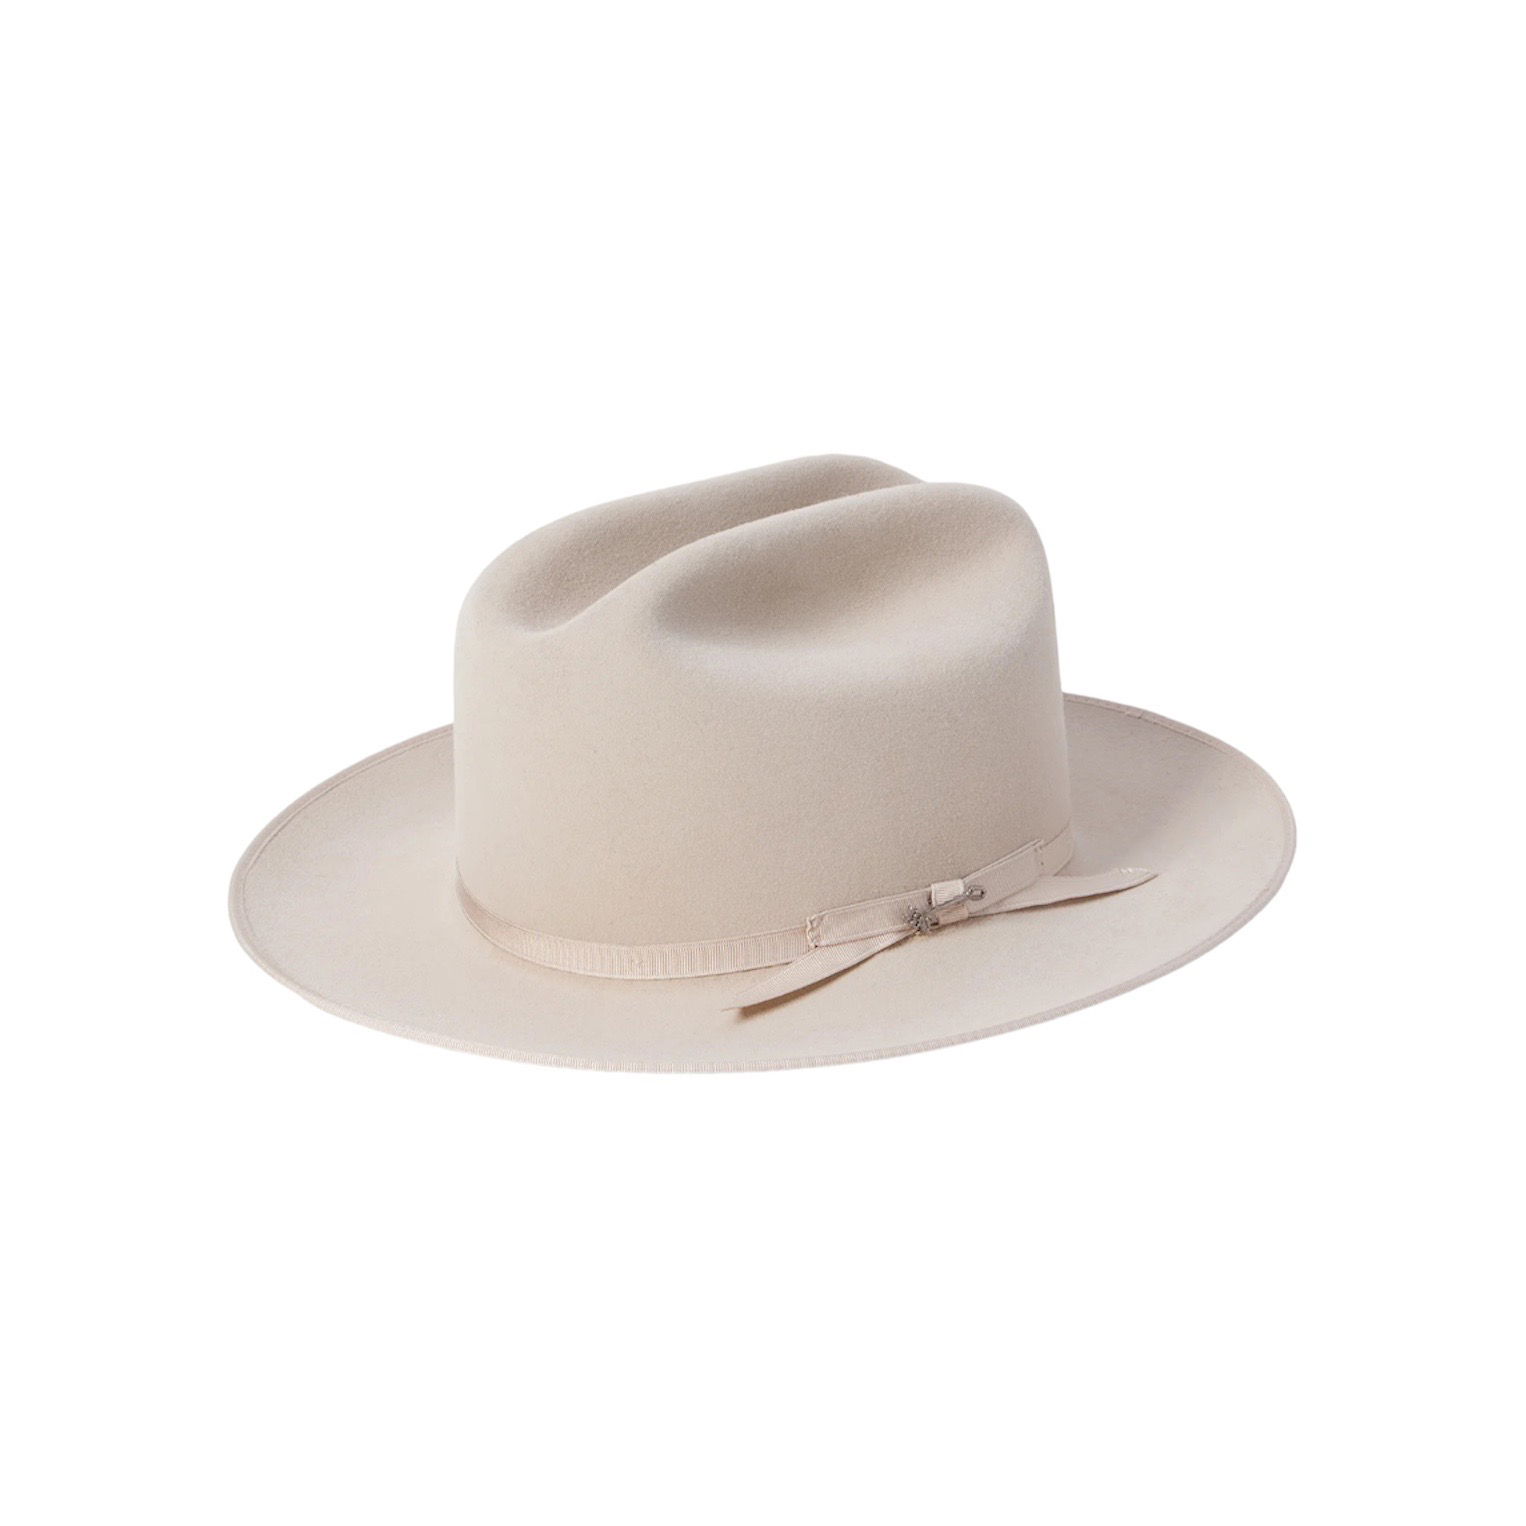 Stetson Silver Hats for Men for sale